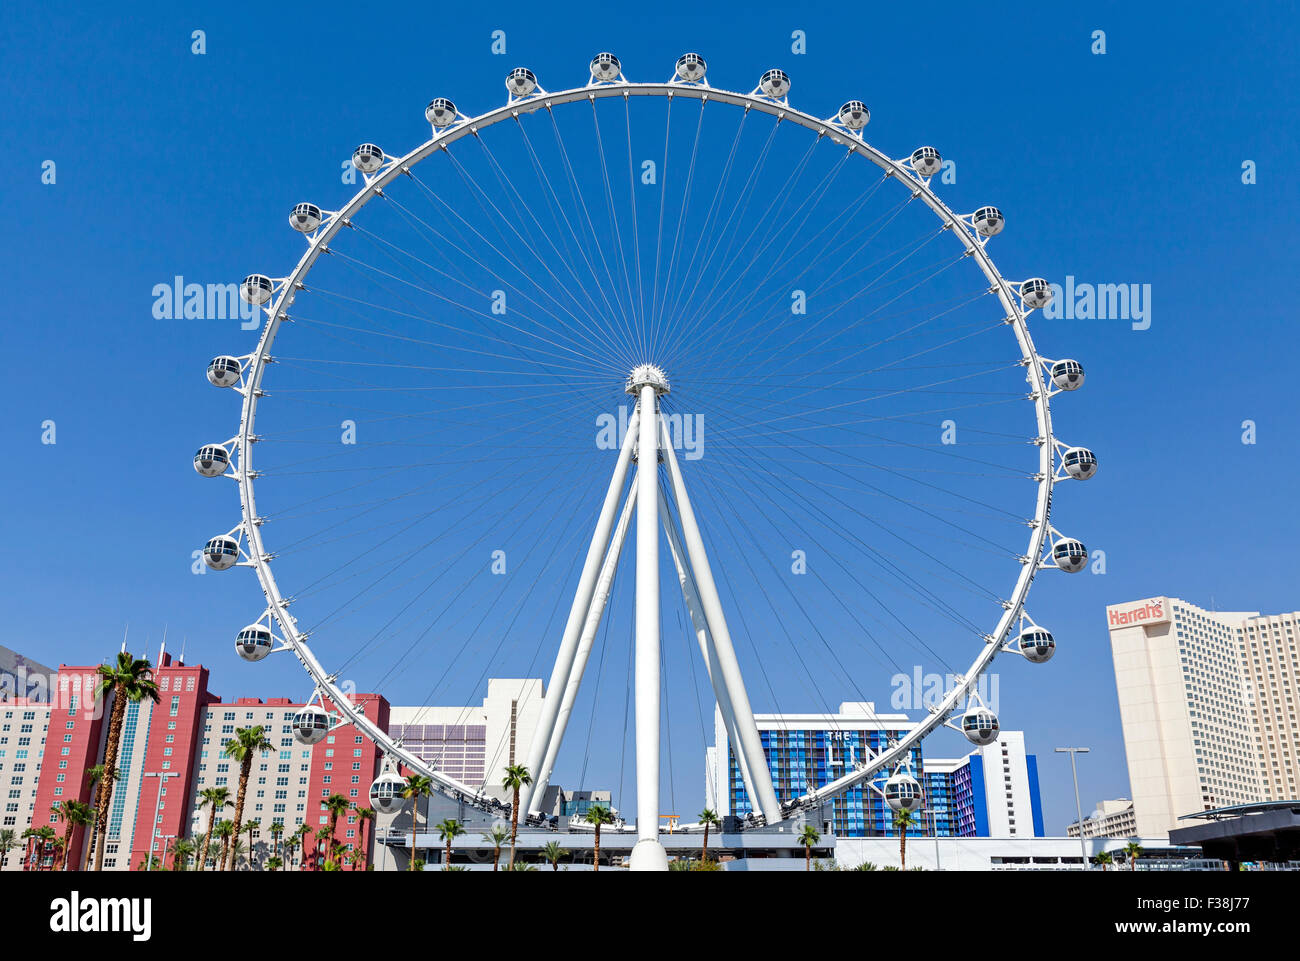 A daytime view of the High Roller Ferris Wheel during the day. Stock Photo